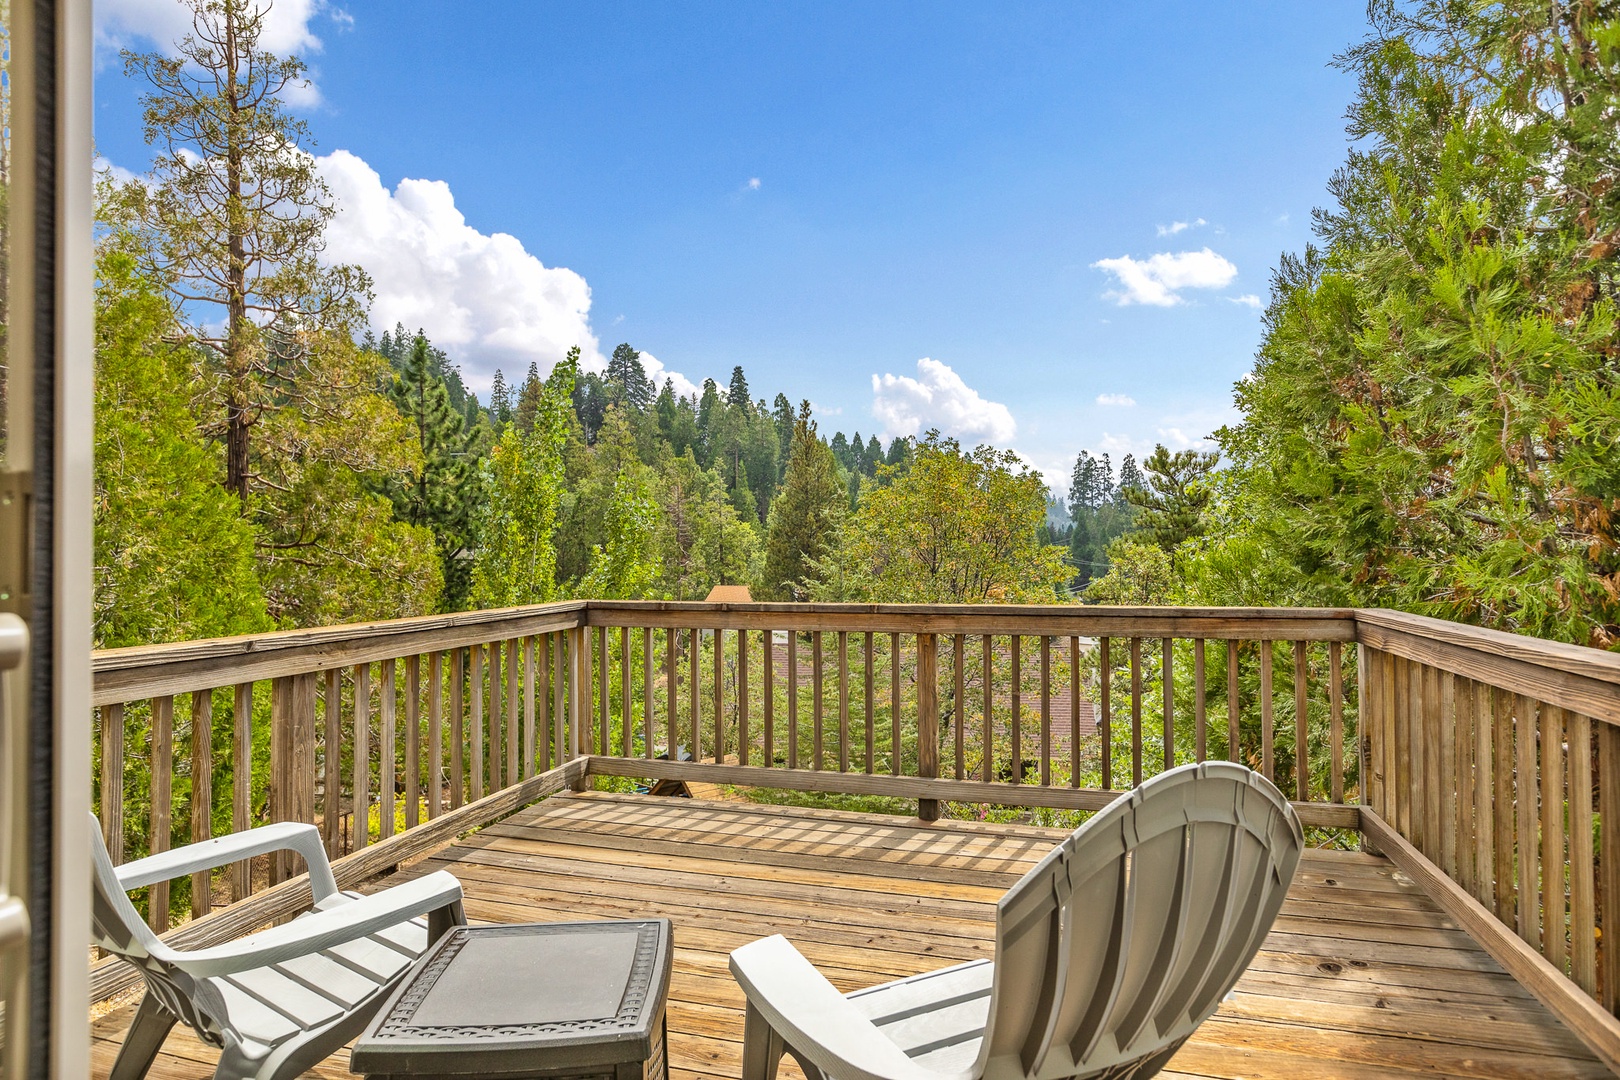 Soak in the forest views!